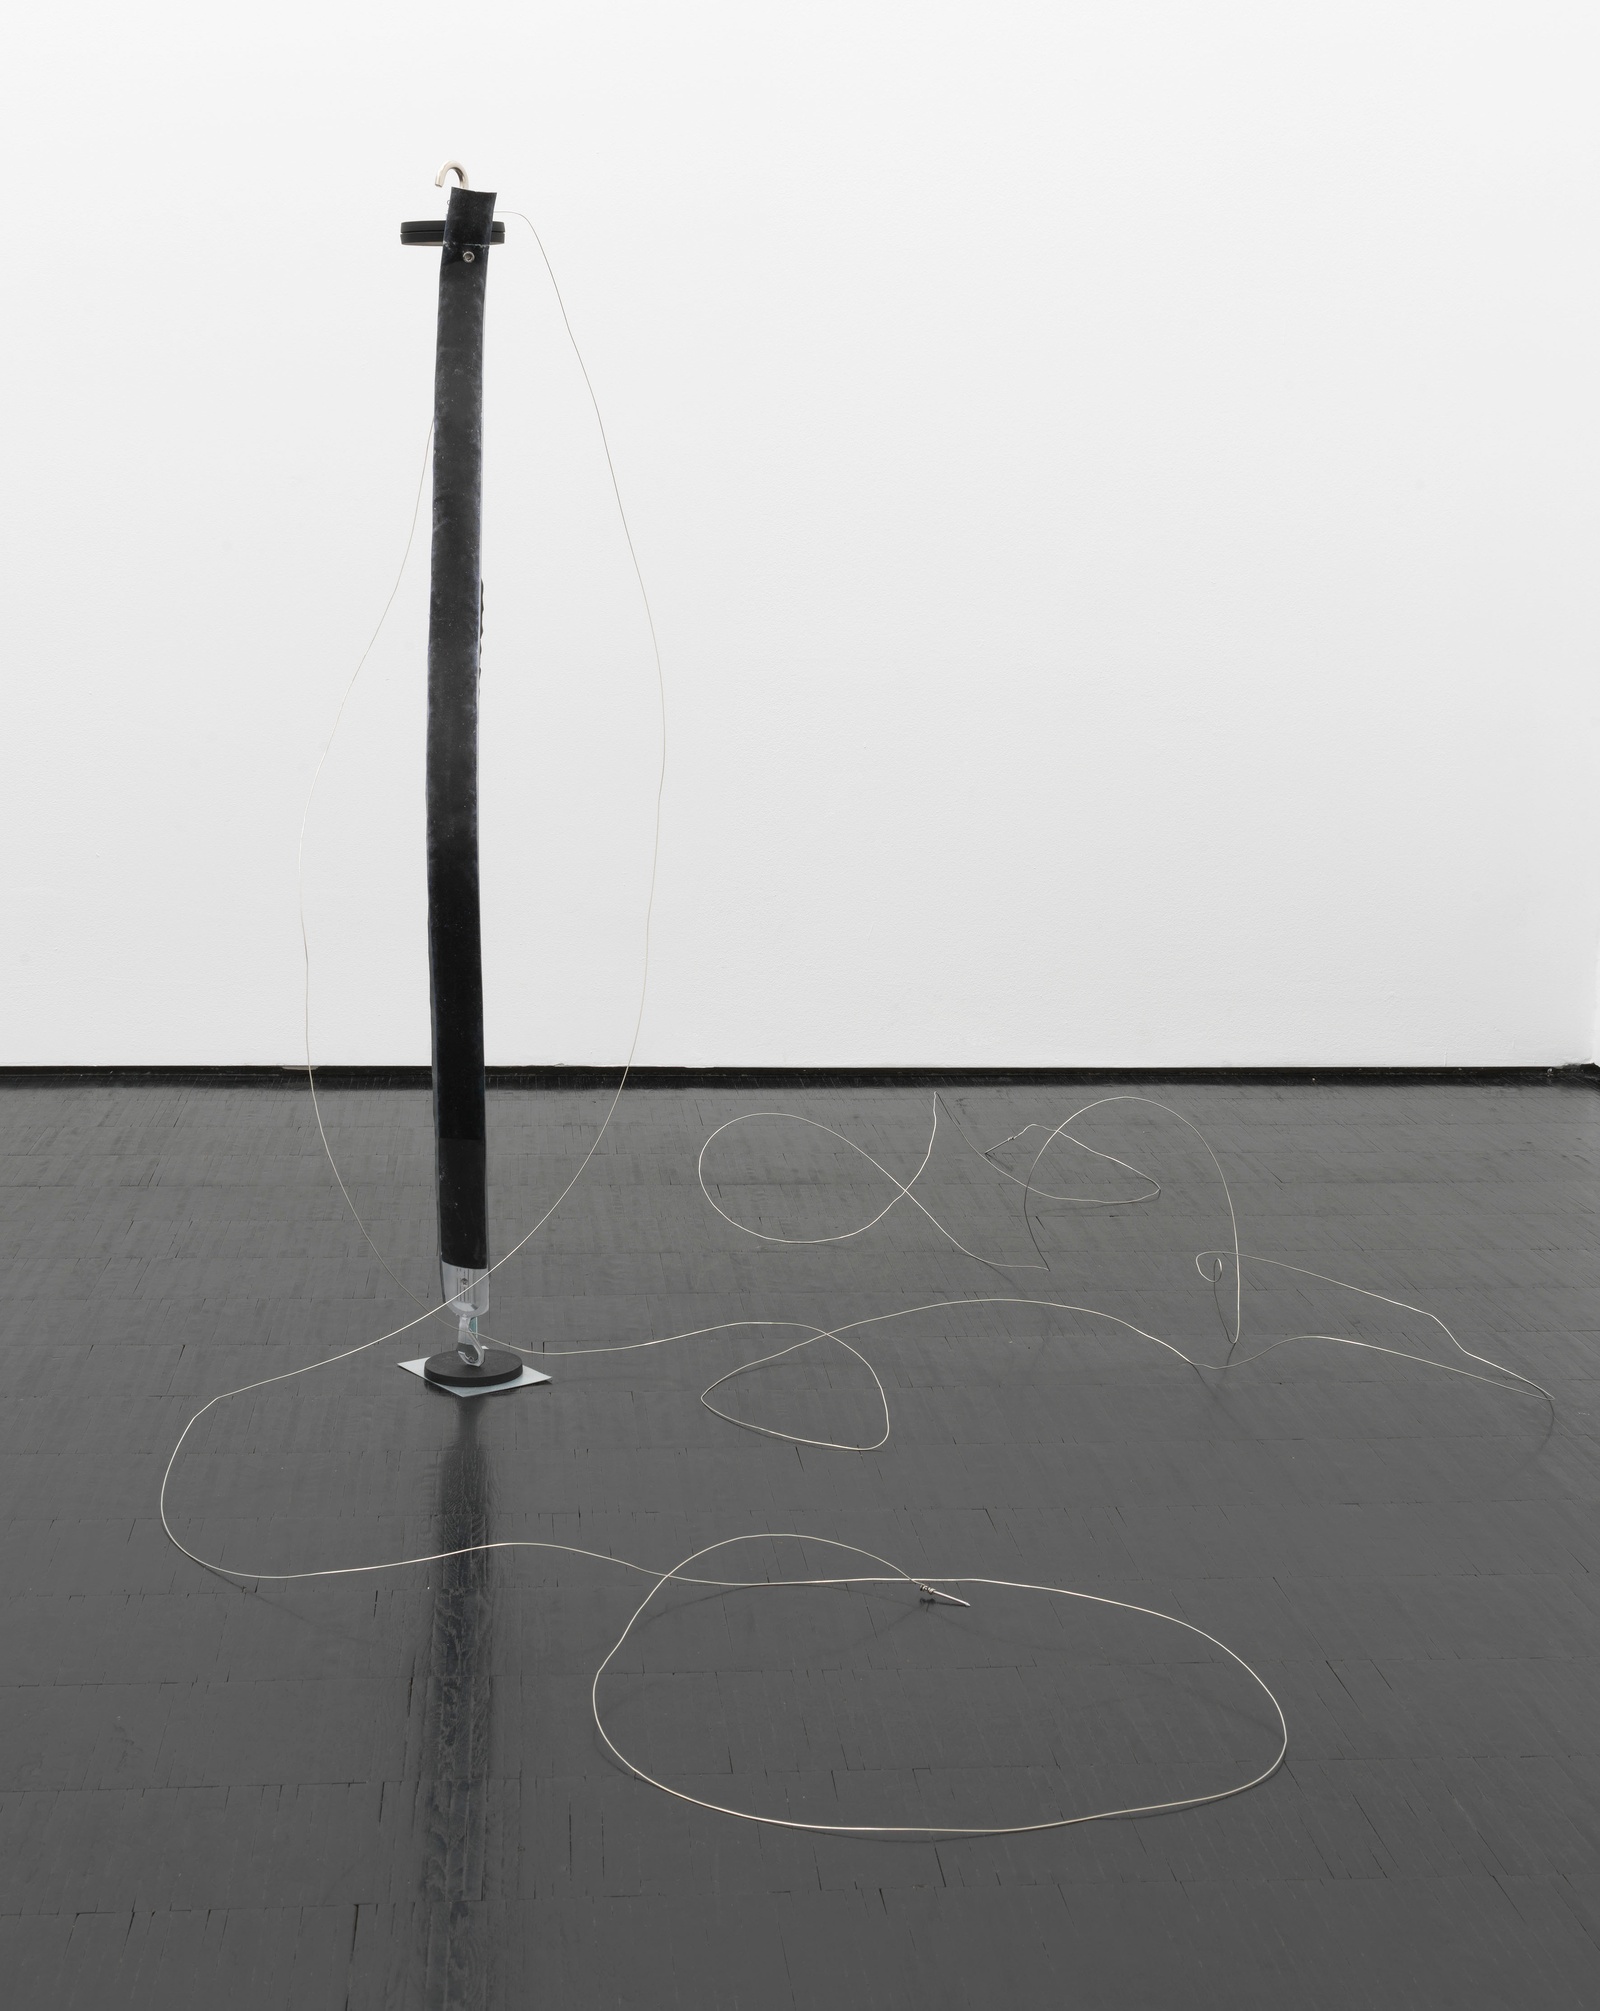 With a Crooked Stance, 2021. acrylic, metal, clay, inkjet print, steel rod, wire, nails, magnets. 42.5 x 190 x 56 cm